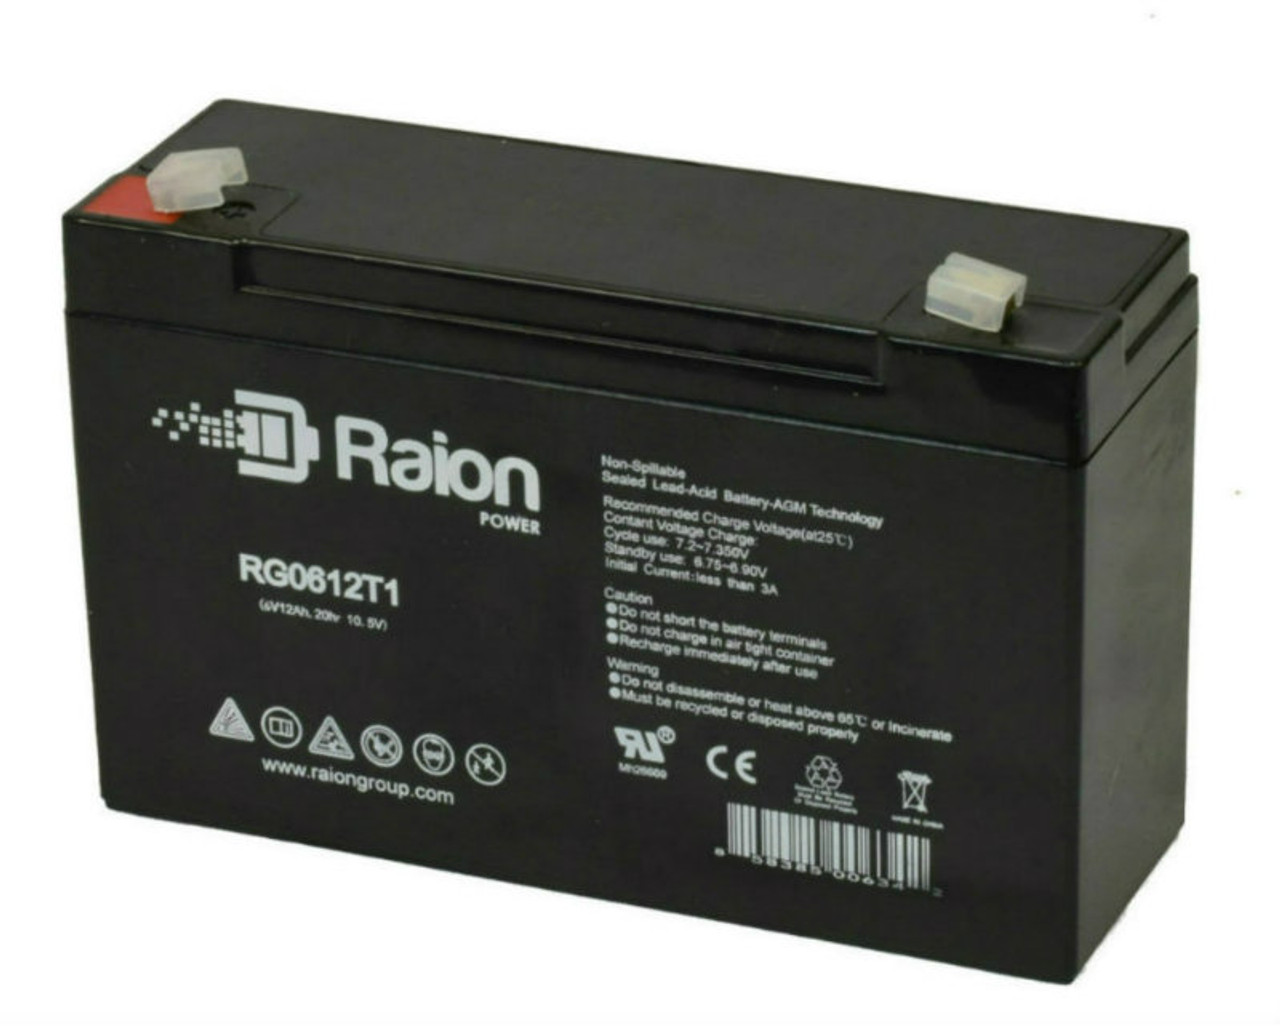 Raion Power RG06120T1 Replacement Battery for Kontron 01334336 Medical Equipment